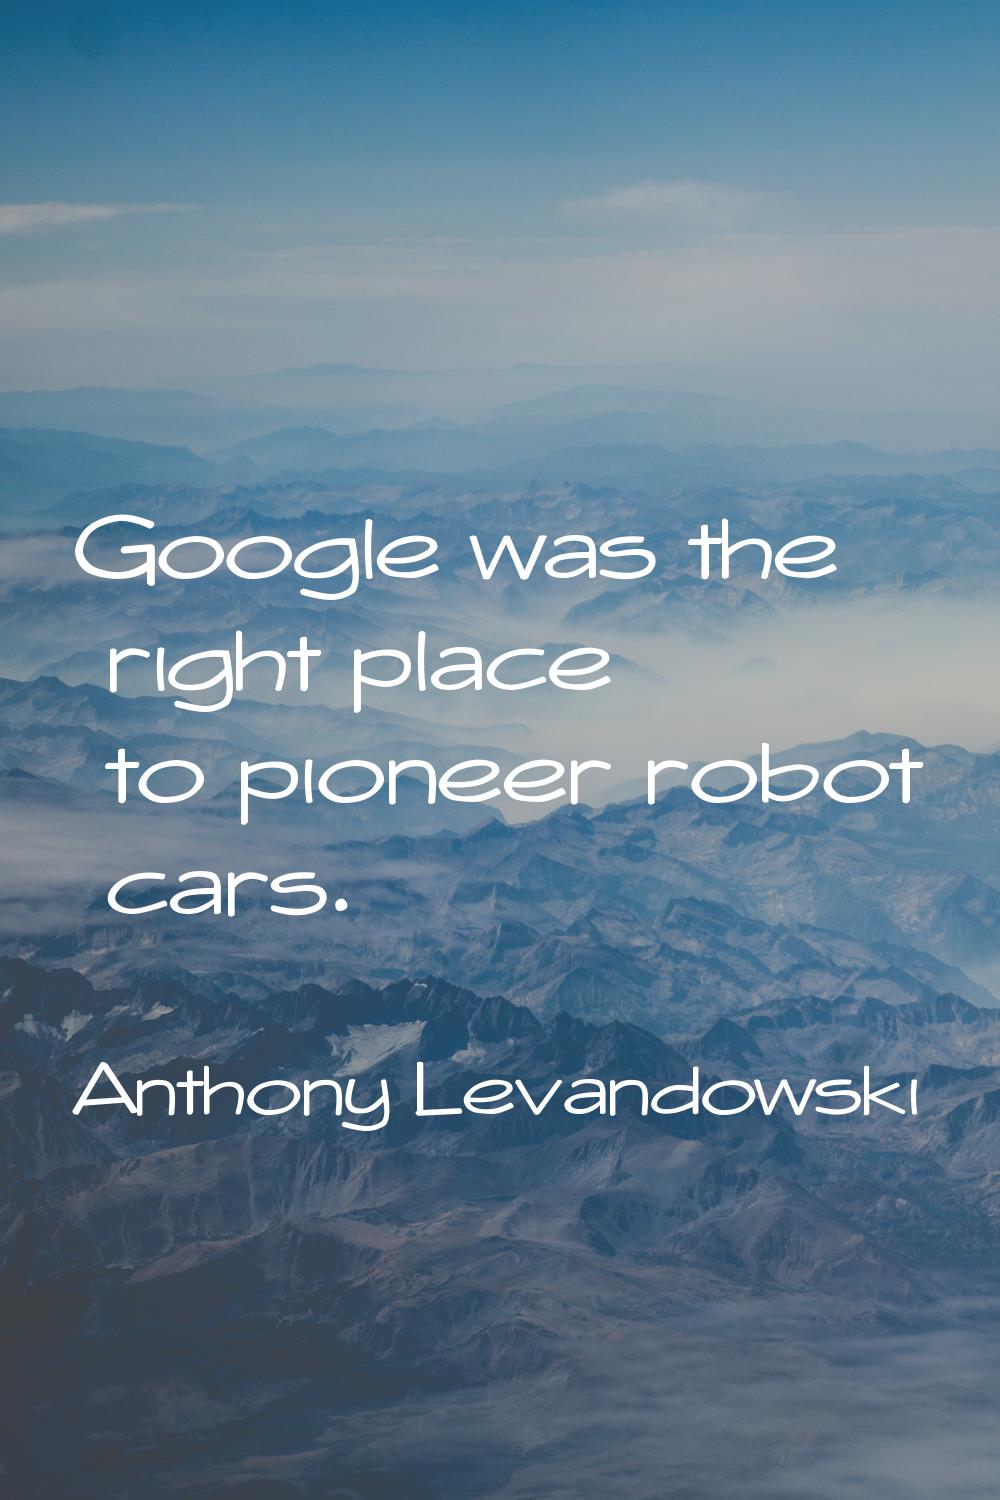 Google was the right place to pioneer robot cars.